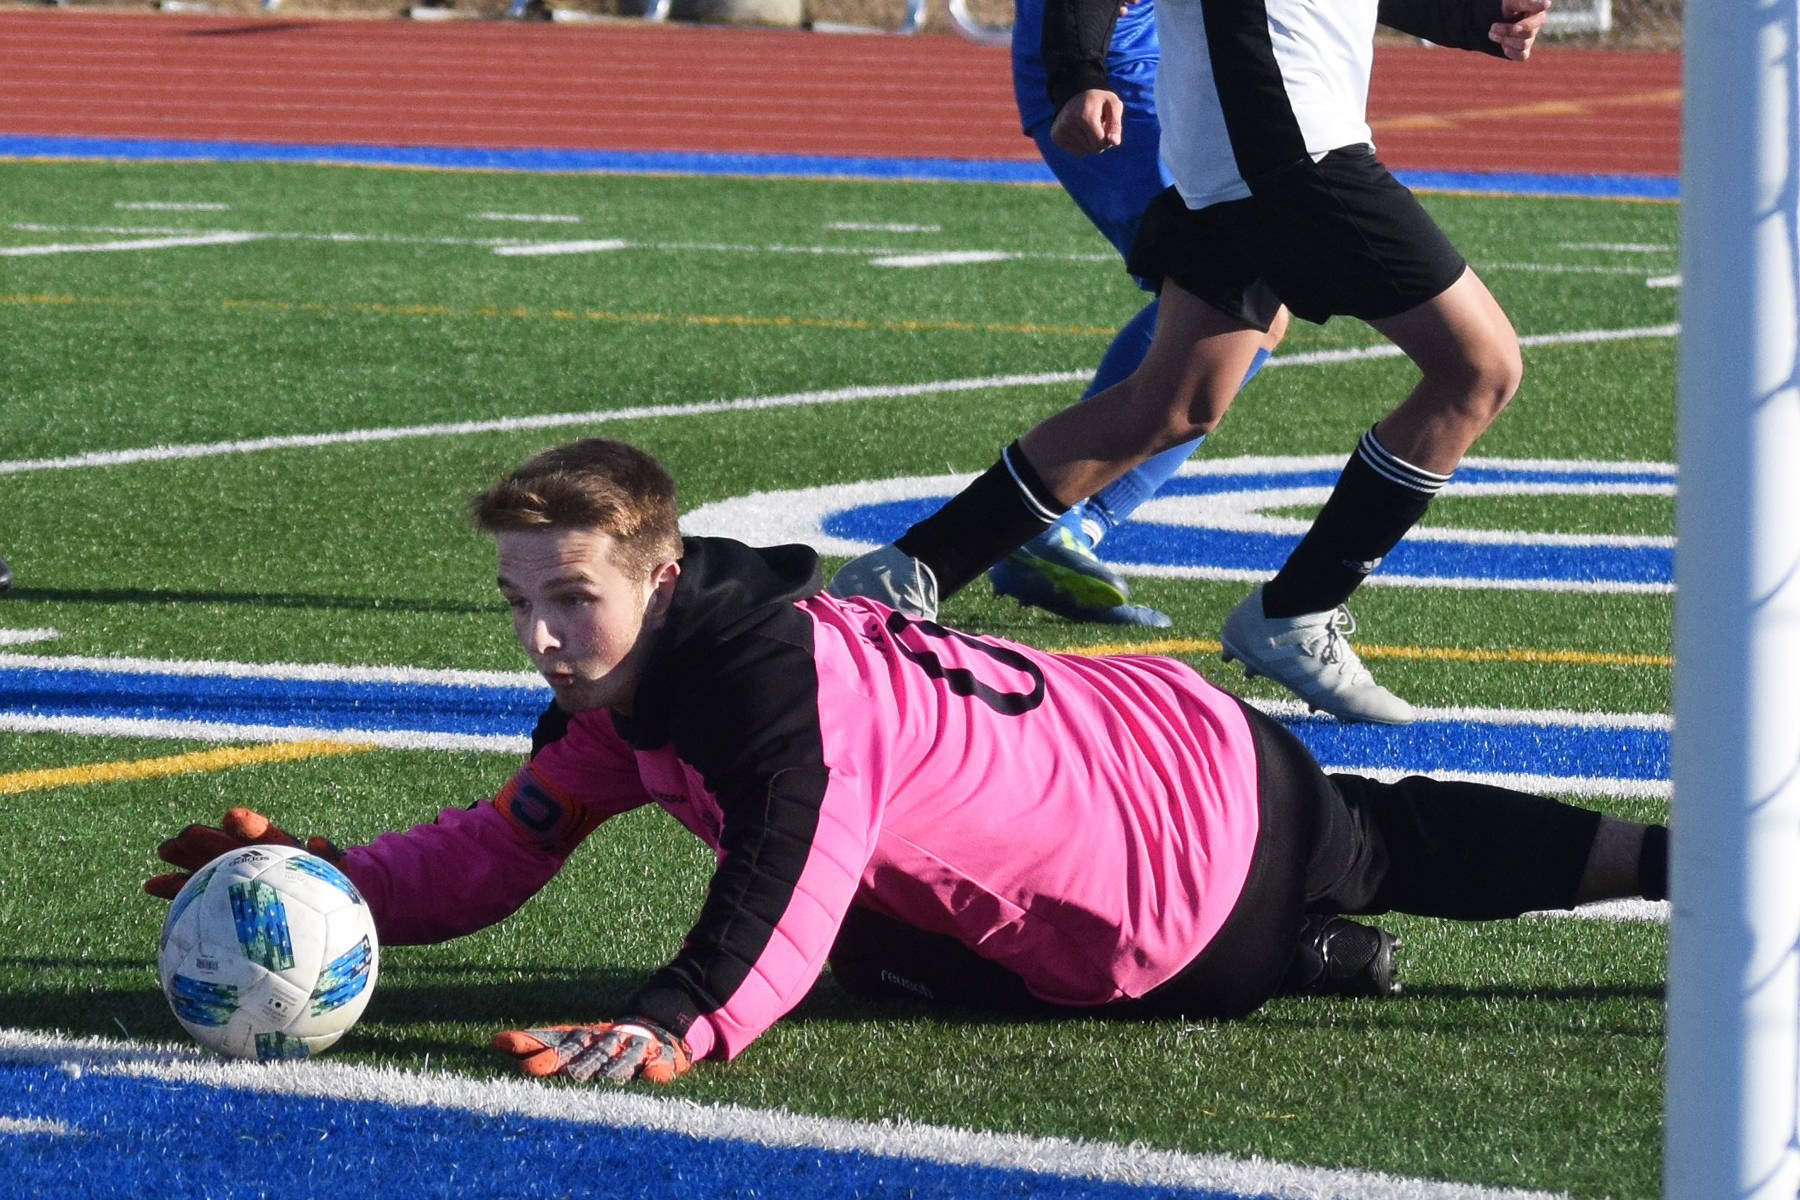 Nikiski goalkeeper Michael Eiter corrals a save Tuesday in a Peninsula Conference game at Soldotna High School. (Photo by Joey Klecka/Peninsula Clarion)